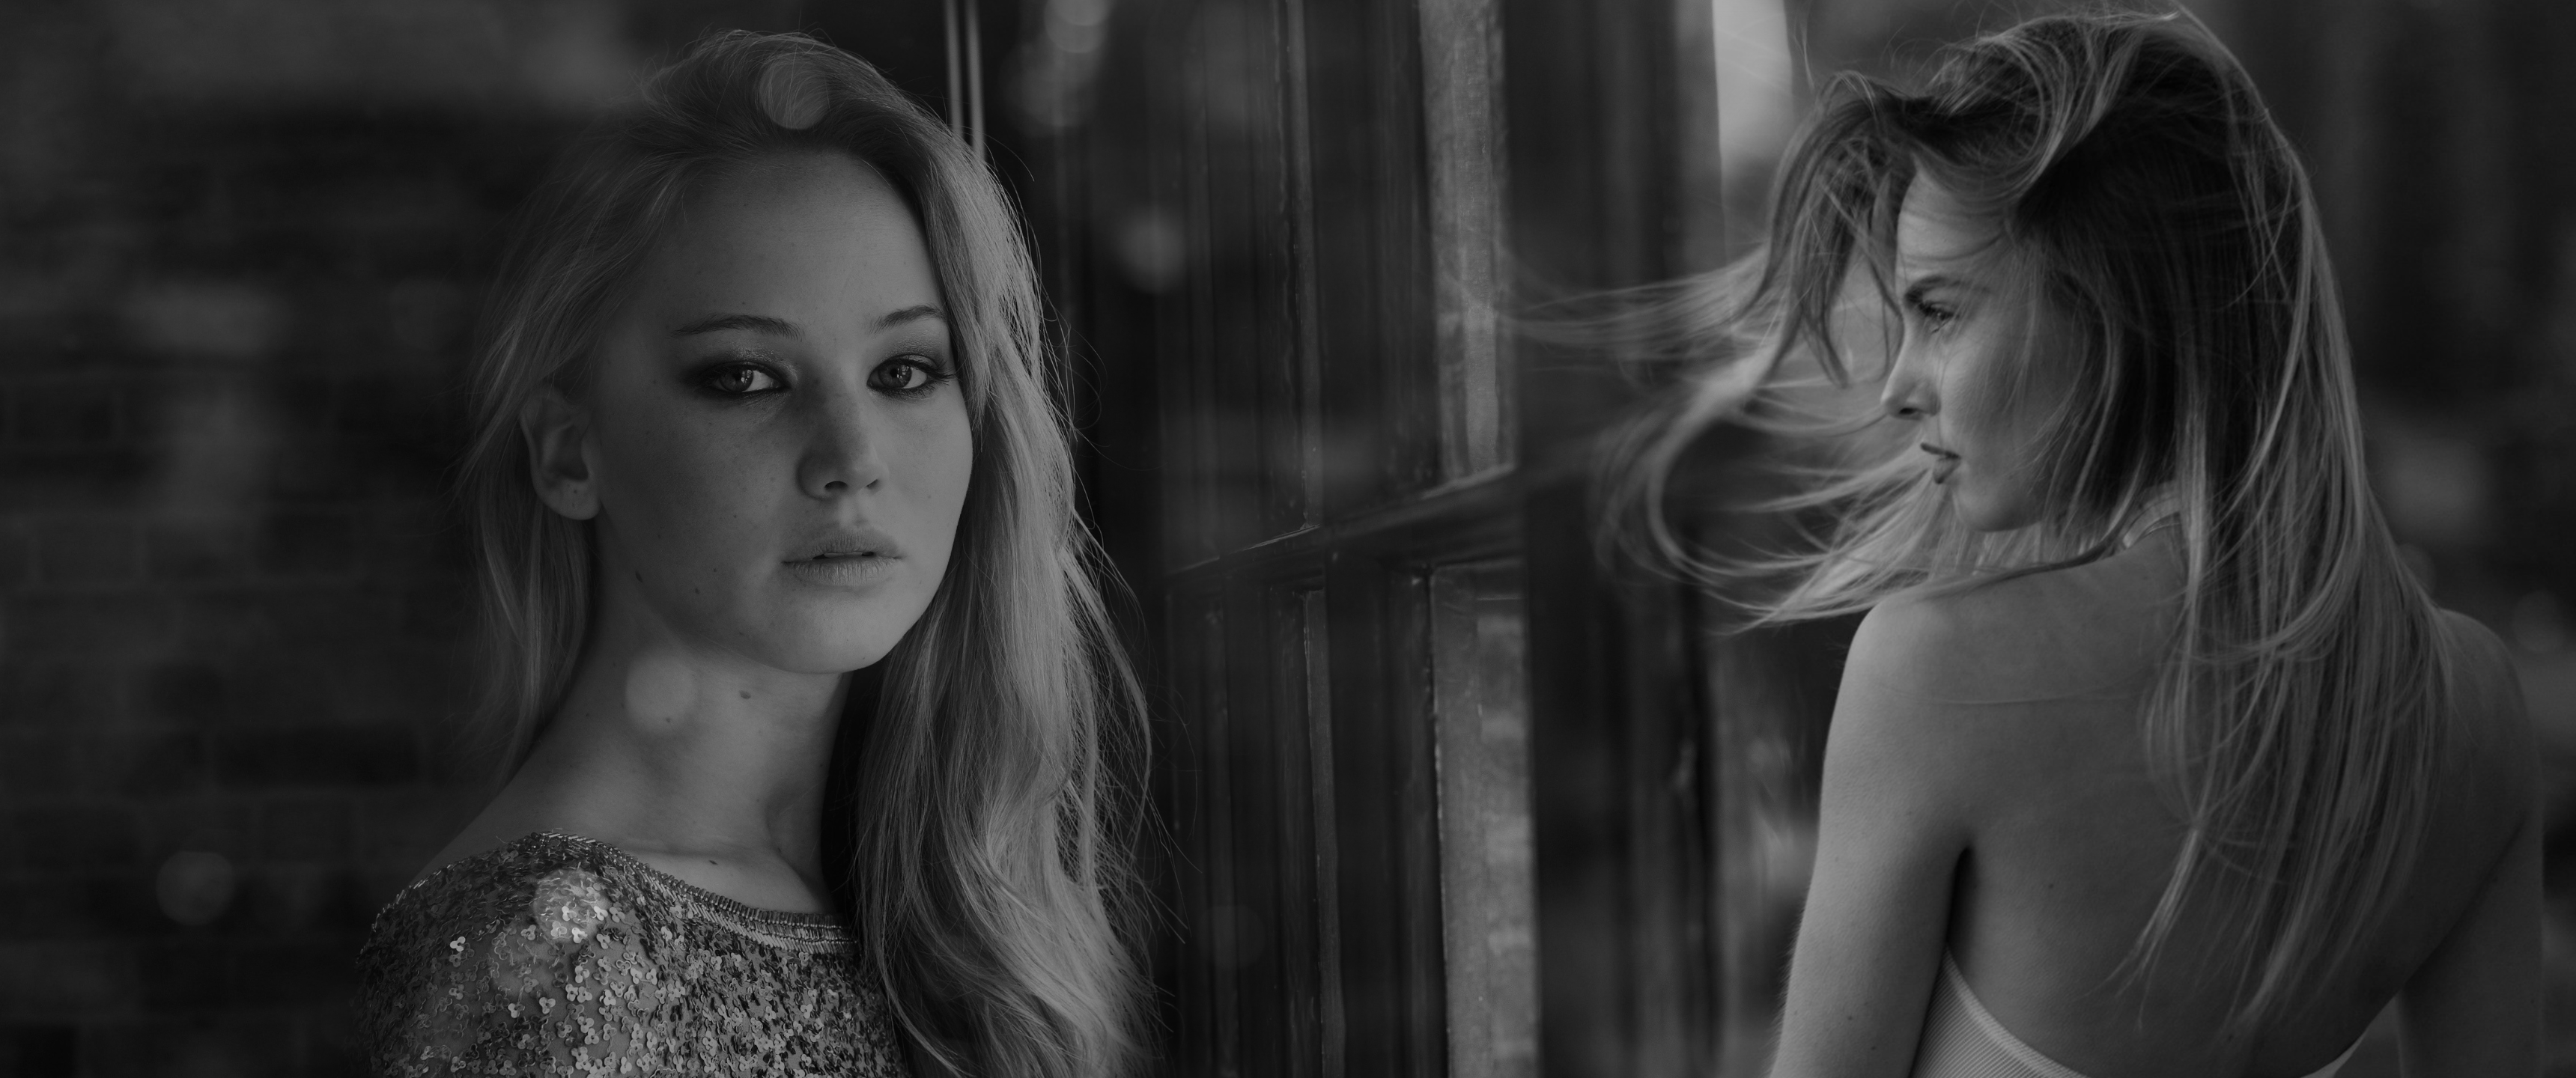 People 3440x1440 Jennifer Lawrence monochrome window photo manipulation women actress celebrity collage looking at viewer face American women